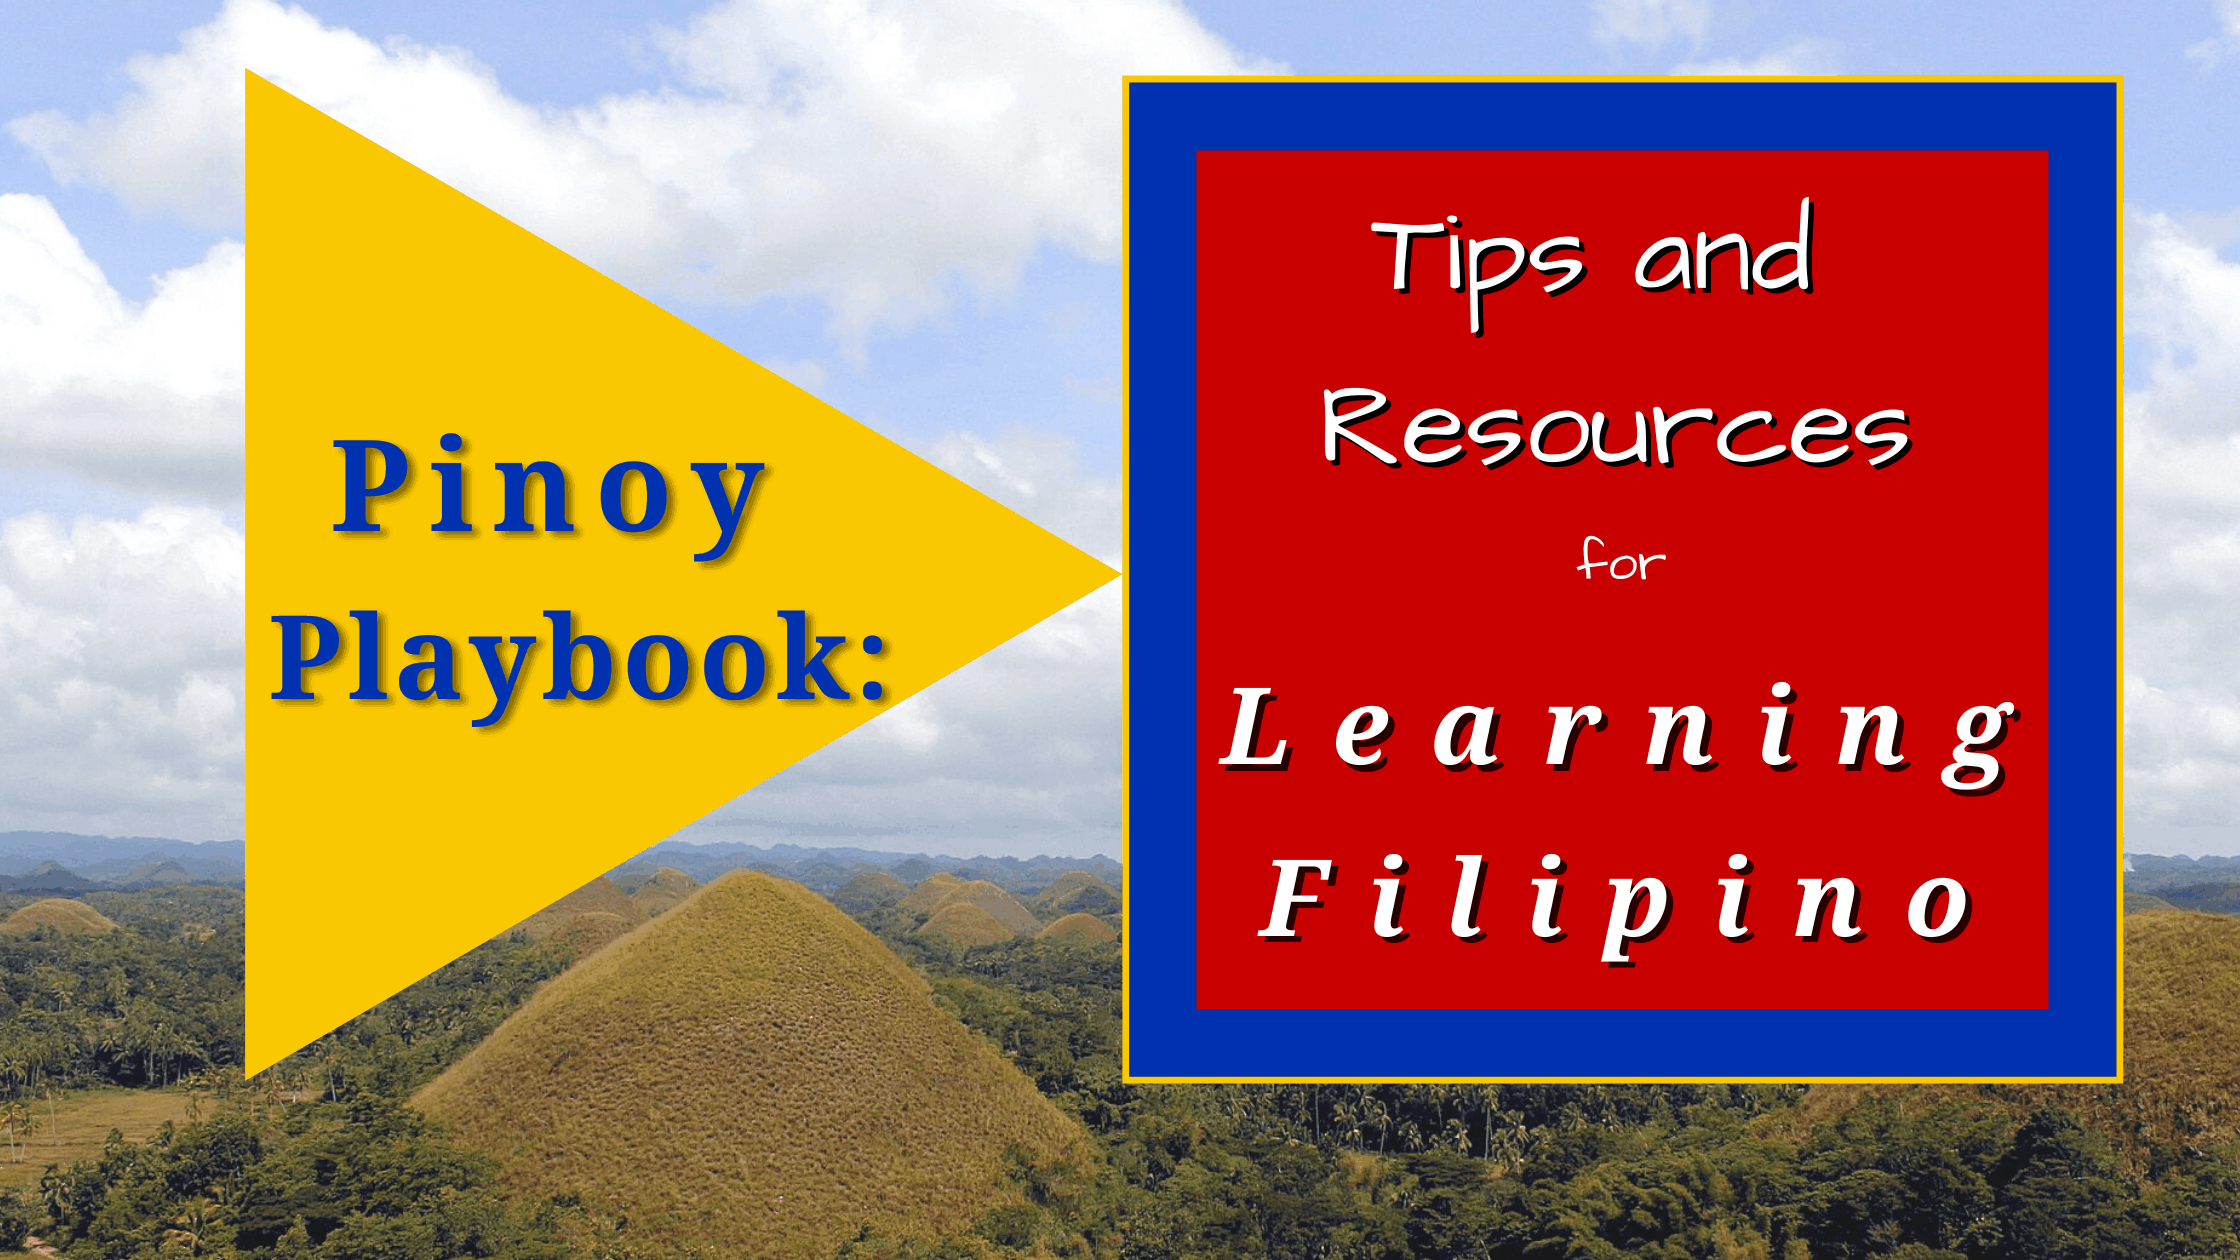 Pinoy Playbook: Tips and Resources for Learning Filipino